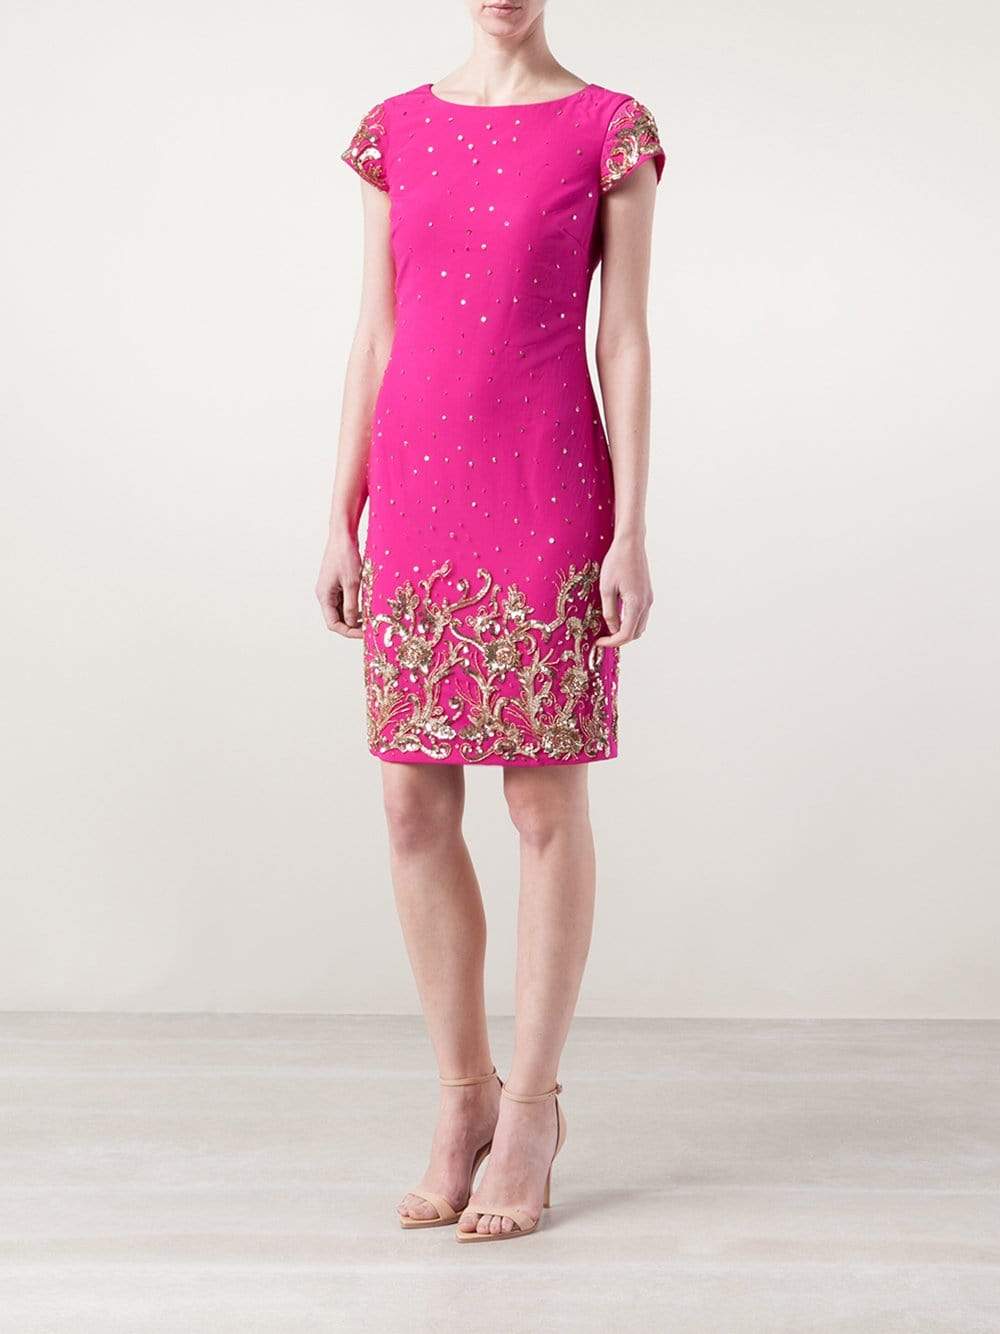 MARCHESA NOTTE-Beaded Shift Cocktail Dress-PINK